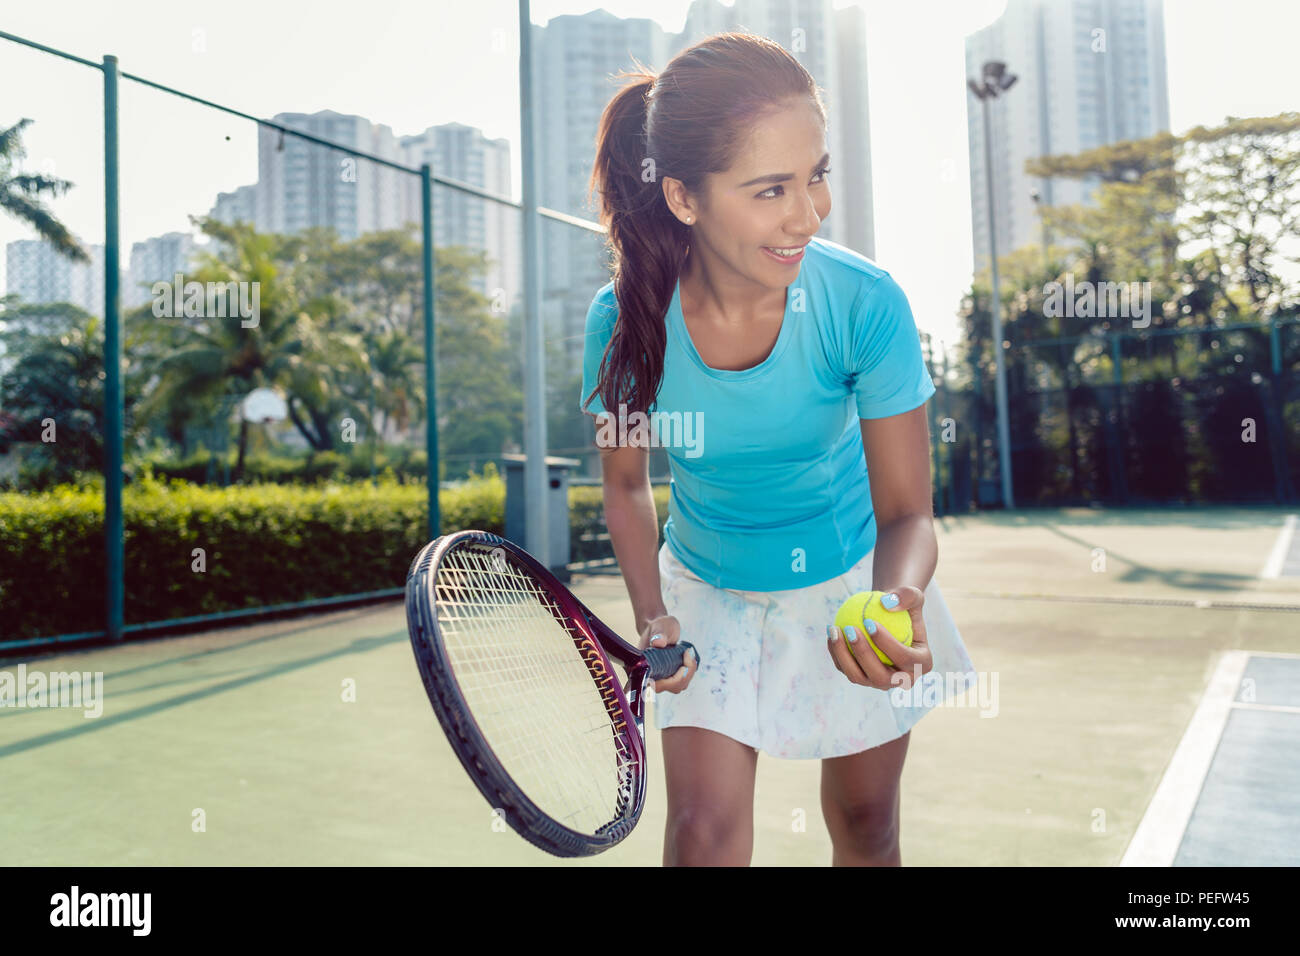 Professional female player smiling while serving during tennis match Stock Photo